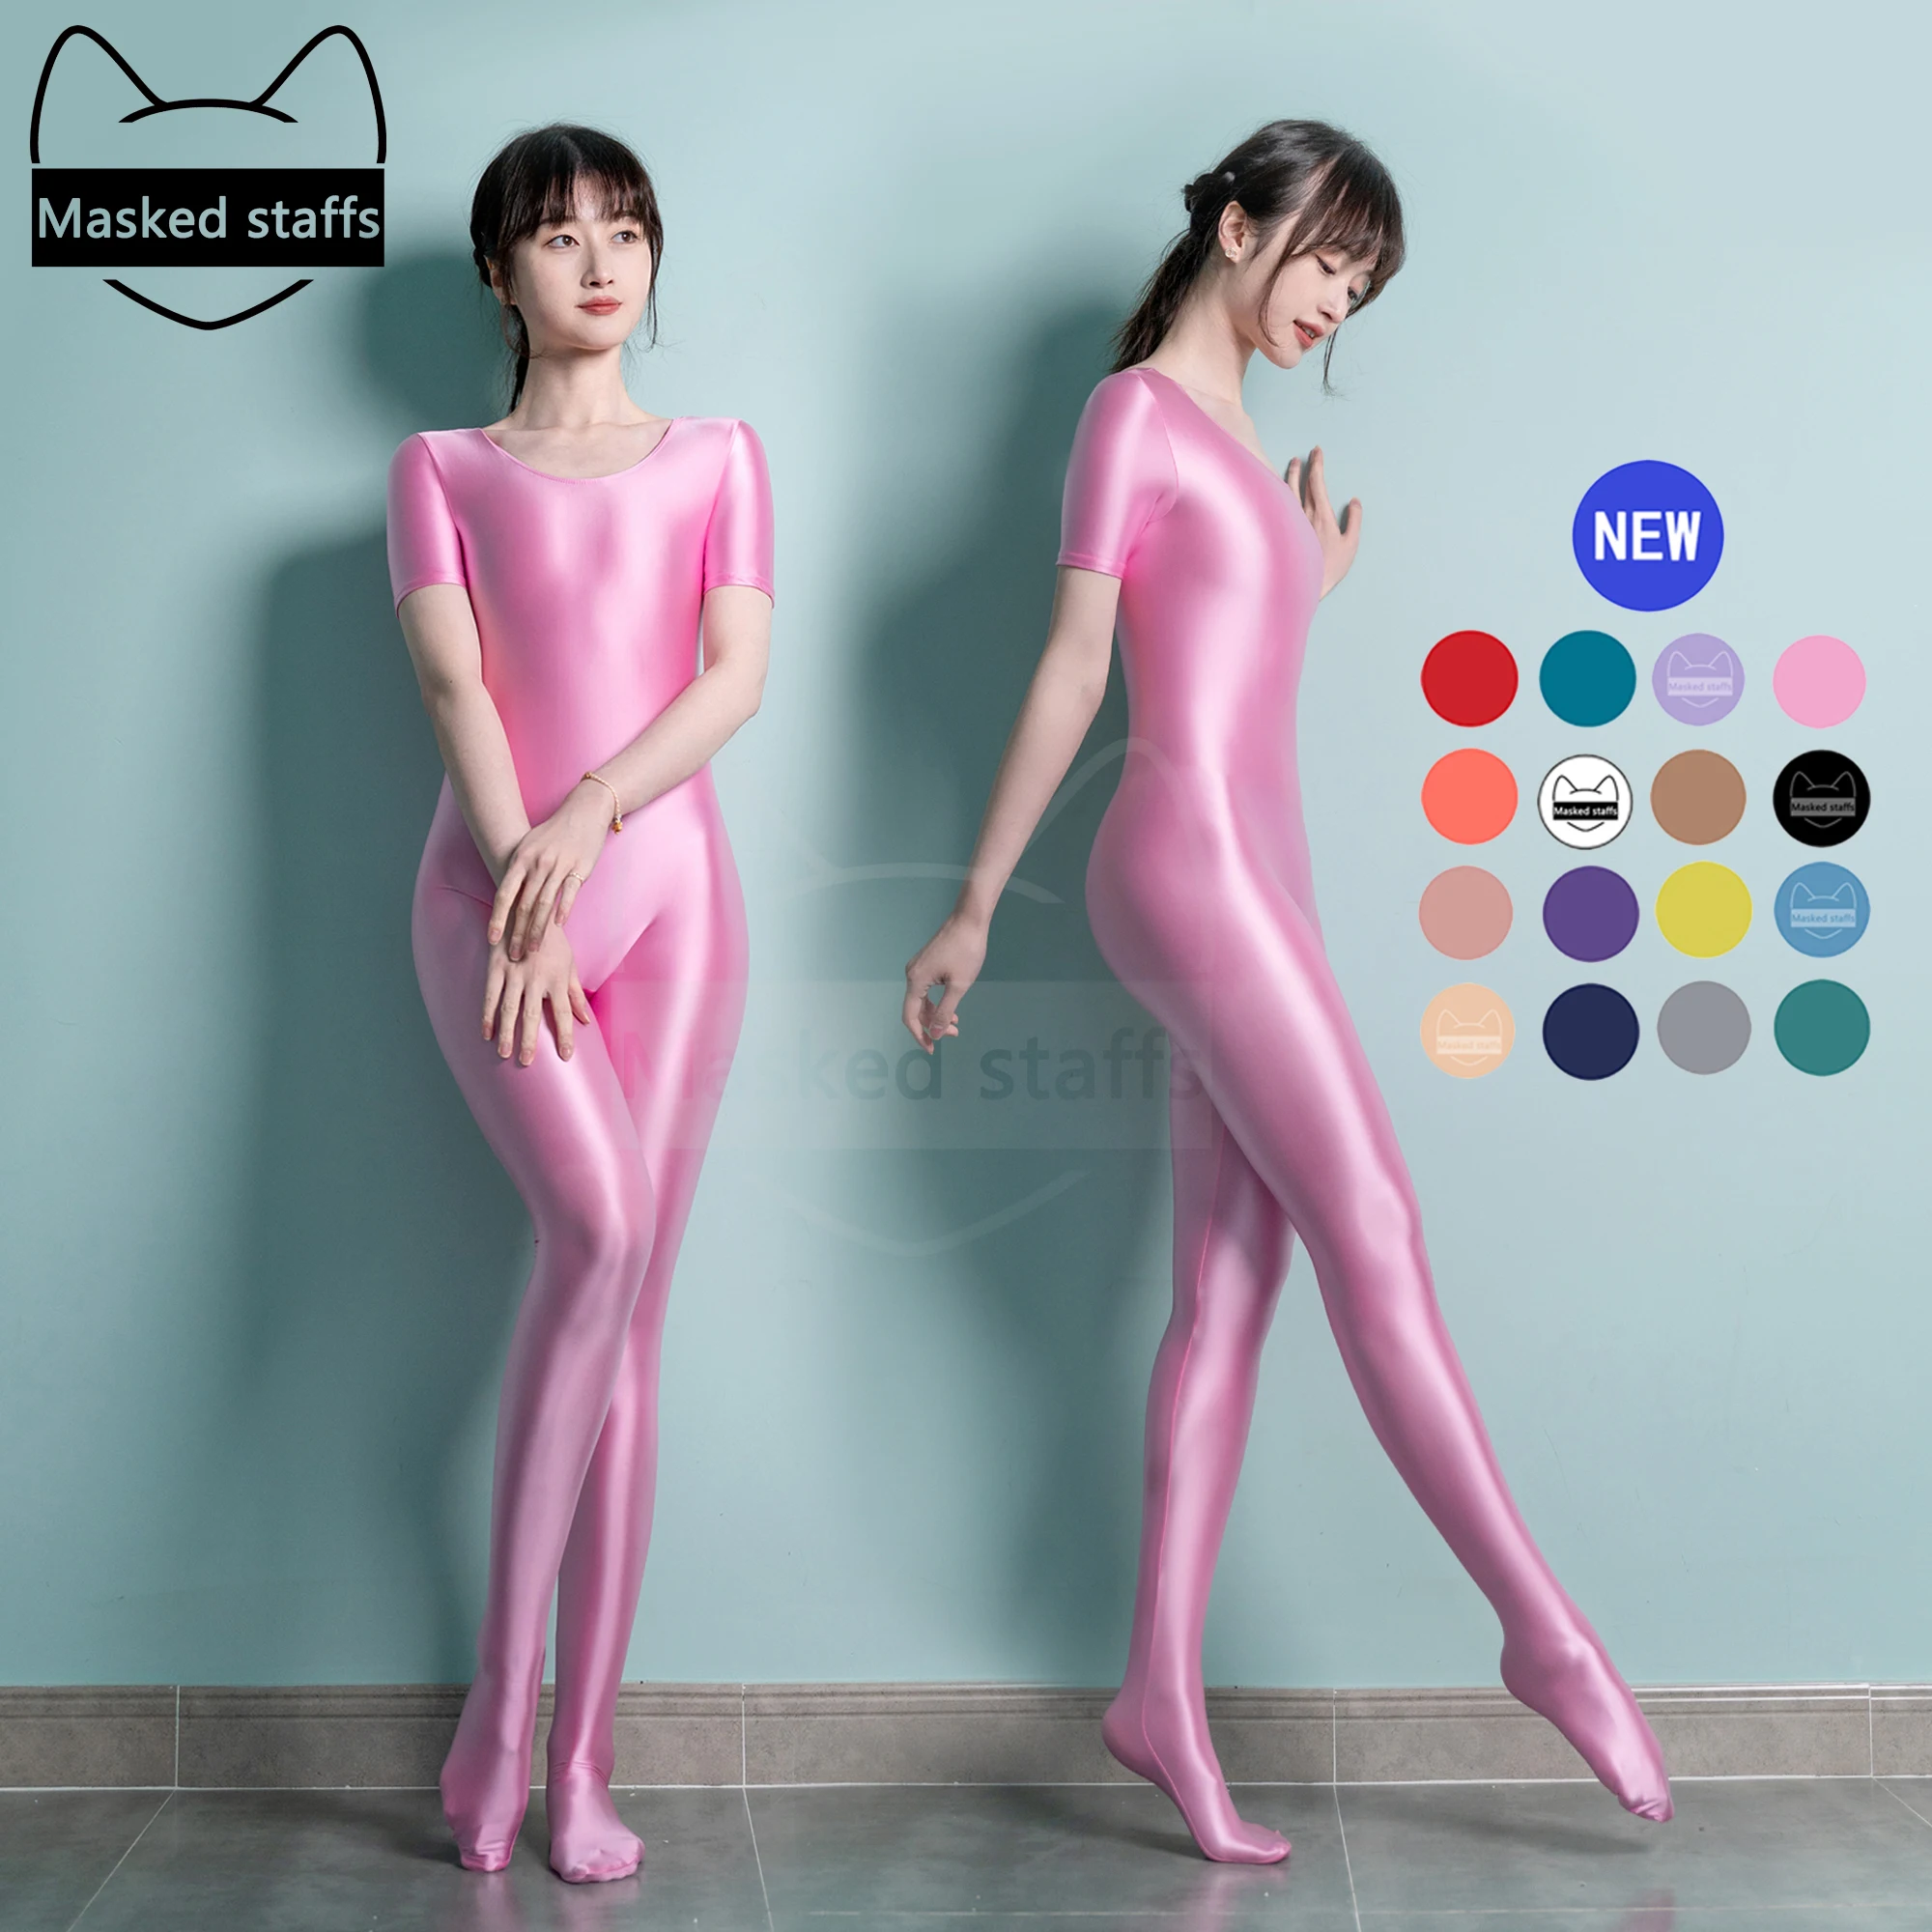 

Silky seamless Tights Oil Glossy Catsuit One-piece Sport Pant Sleeveless Waistcoat Playsuit Rompers Overalls Sexy Jumpsuit MJINM